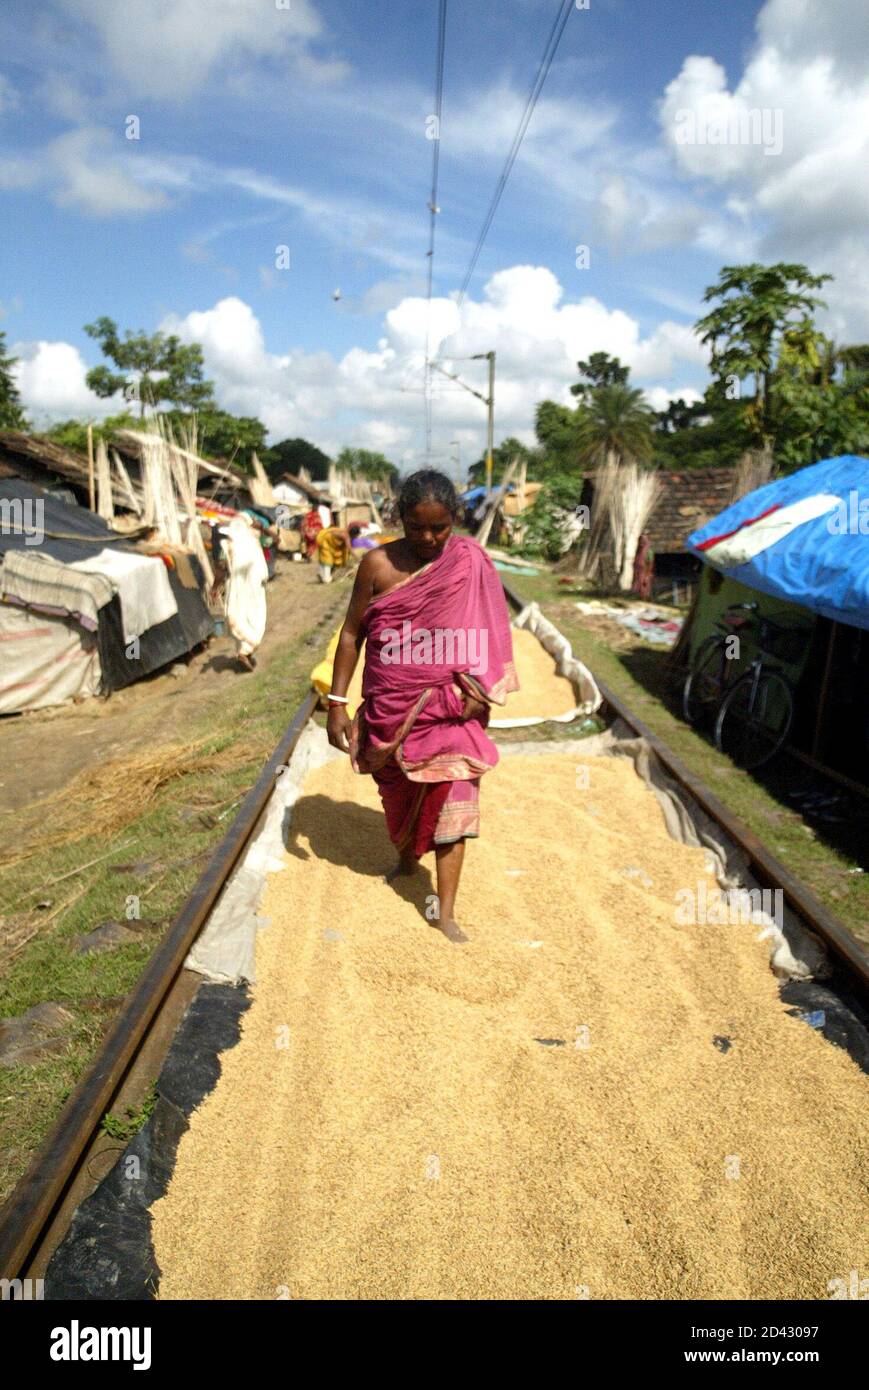 An Indian flood victim dries paddy on a railway line in Banga, near the Bangladesh border 77 km (48 miles) north from the eastern Indian city of Calcutta September 21, 2004. Fresh flooding left 150,000 homeless in West Bengal and authorities were struggling to get emergency supplies to cut-off villages, officials said on Monday. South Asia floods have killed more than 2,000 people since June and made millions homeless in low-lying eastern India and neighbouring Bangladesh and cost billions of dollars in damage. REUTERS/Sucheta Das  SD//CP Stock Photo